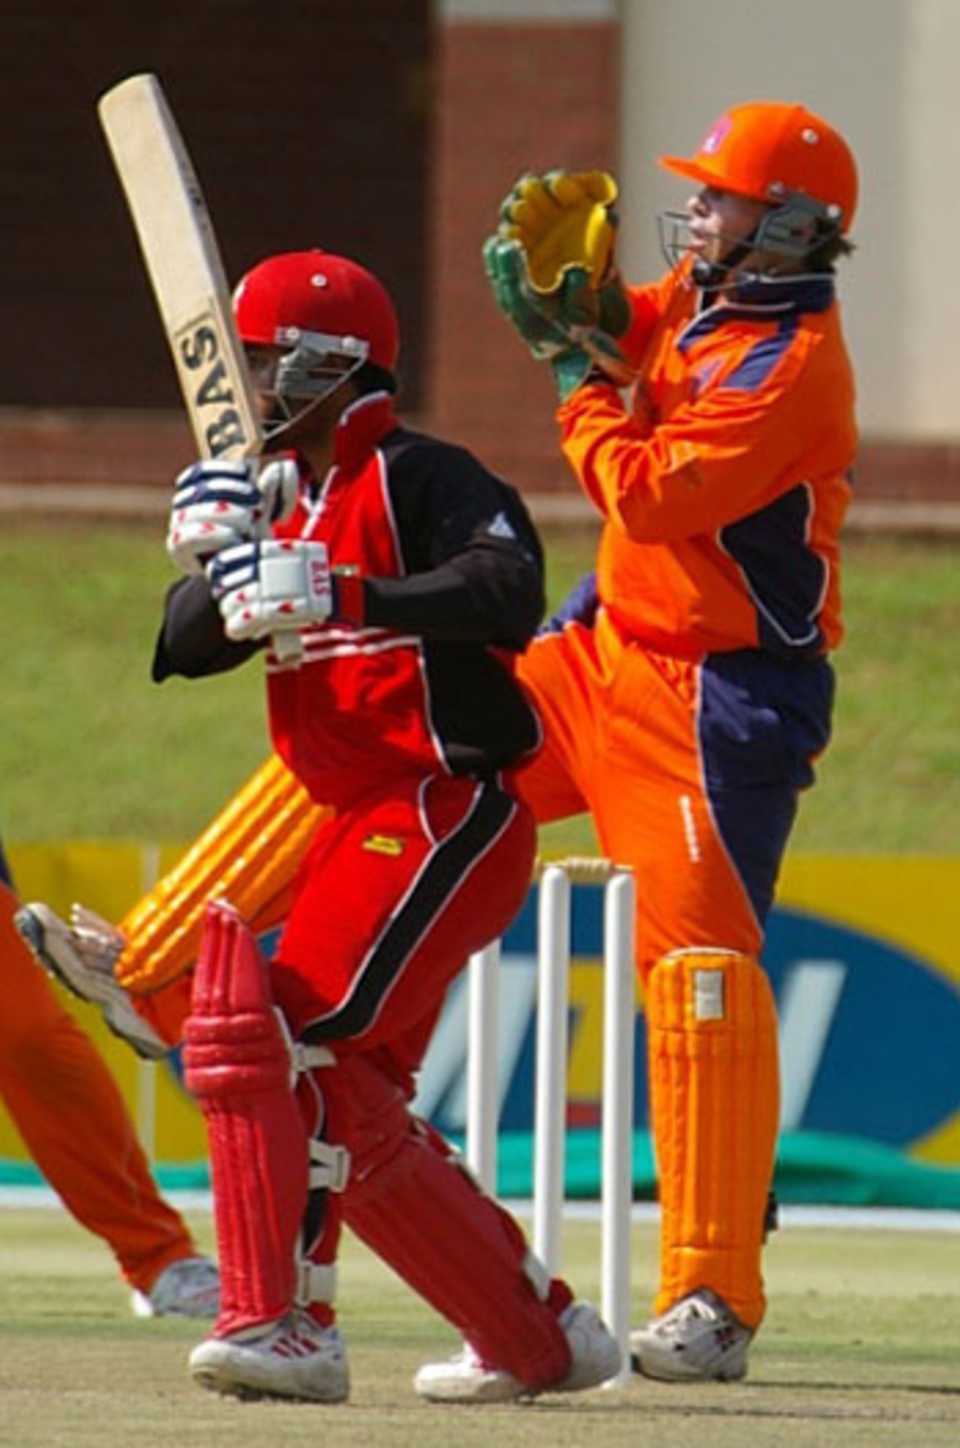 Ashish Bagai drives during his fifty against Netherlands